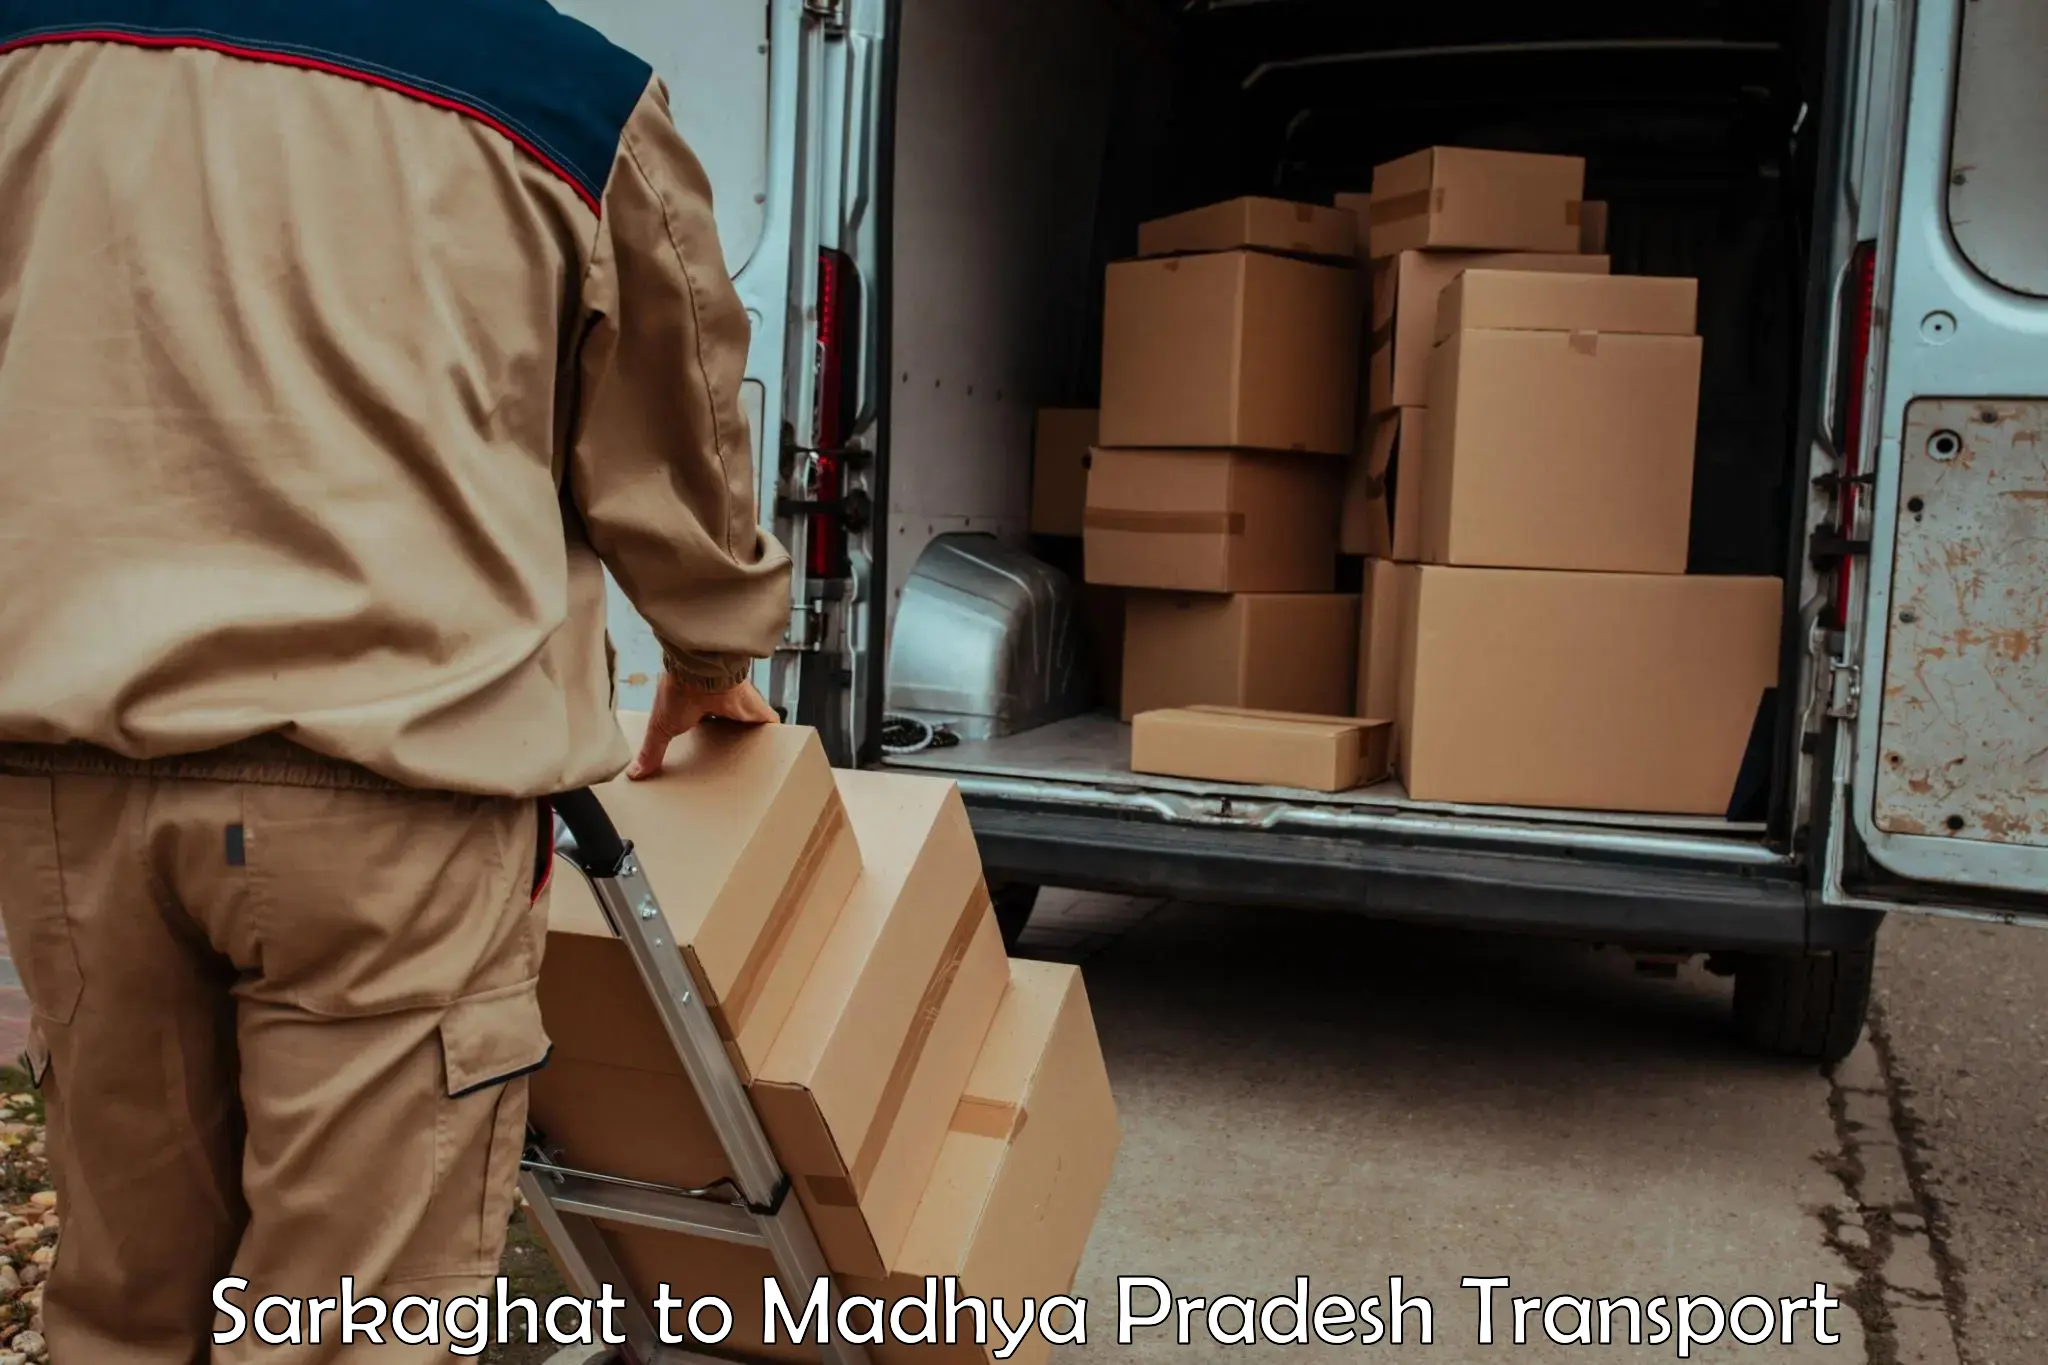 Part load transport service in India Sarkaghat to Madhya Pradesh